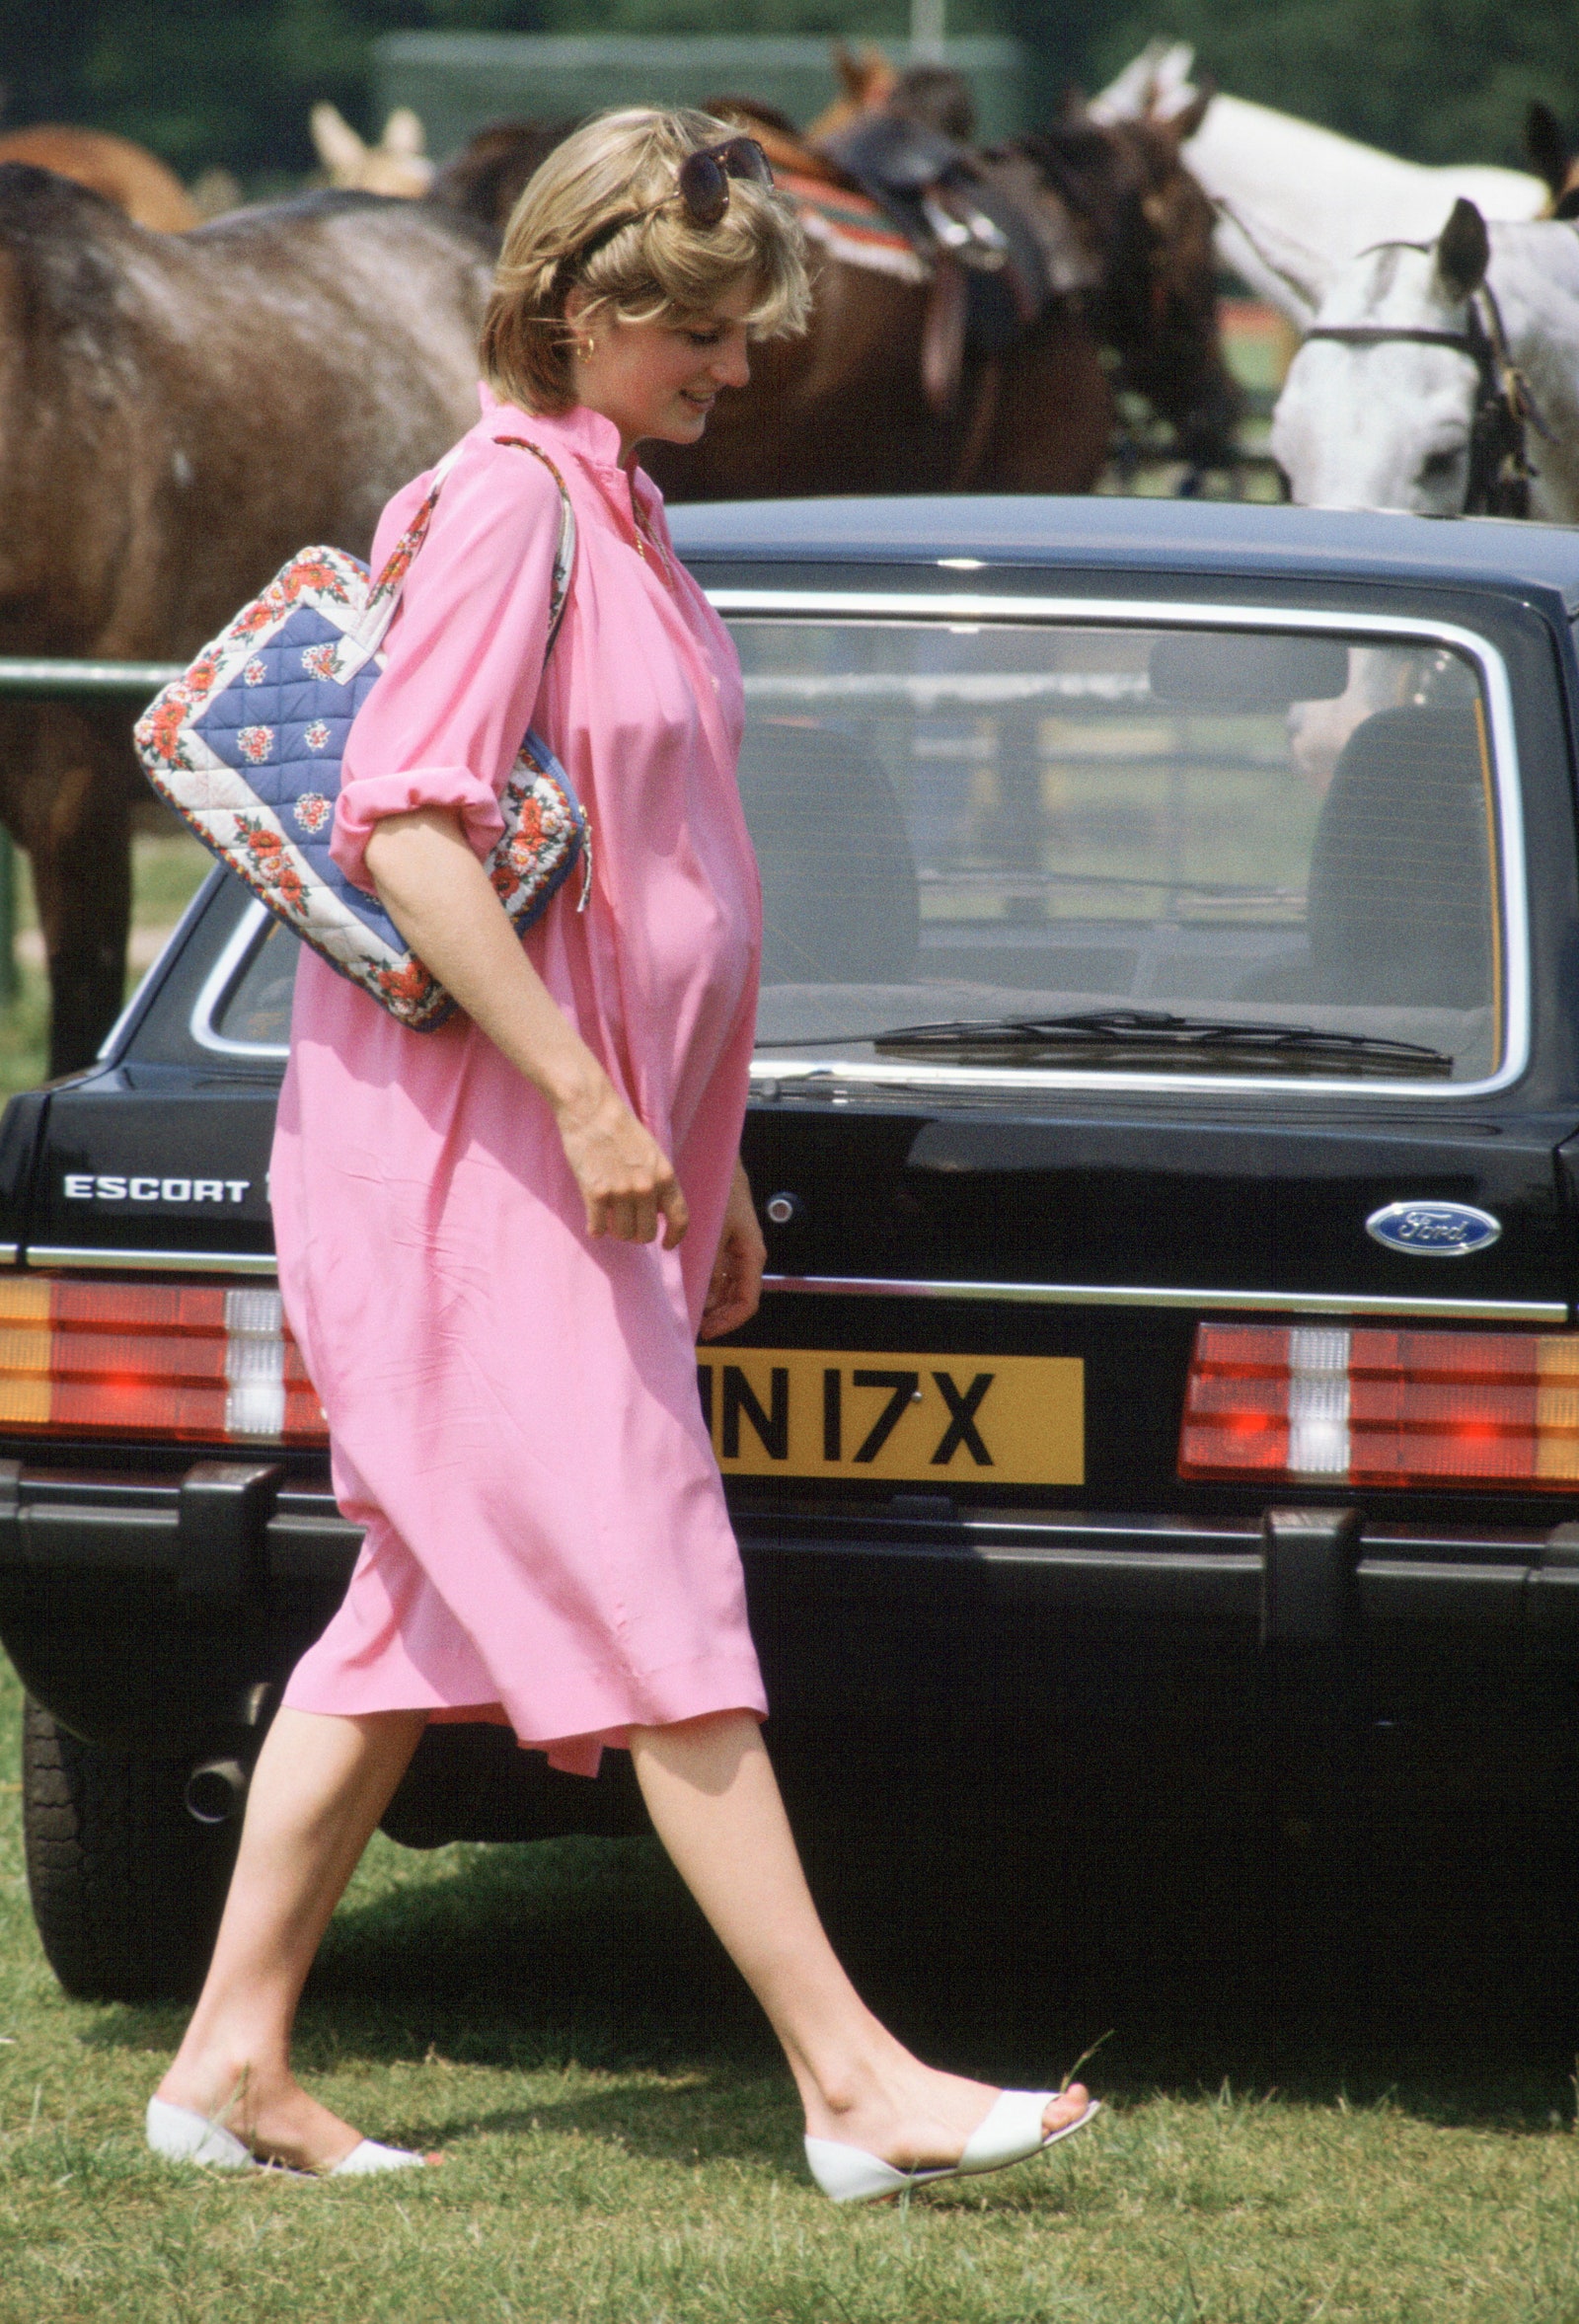 WINDSOR UNITED KINGDOM  JUNE 04 Princess Diana Pregnant With Her First Child  At Polo In Windsor. Behind The Princess Is...